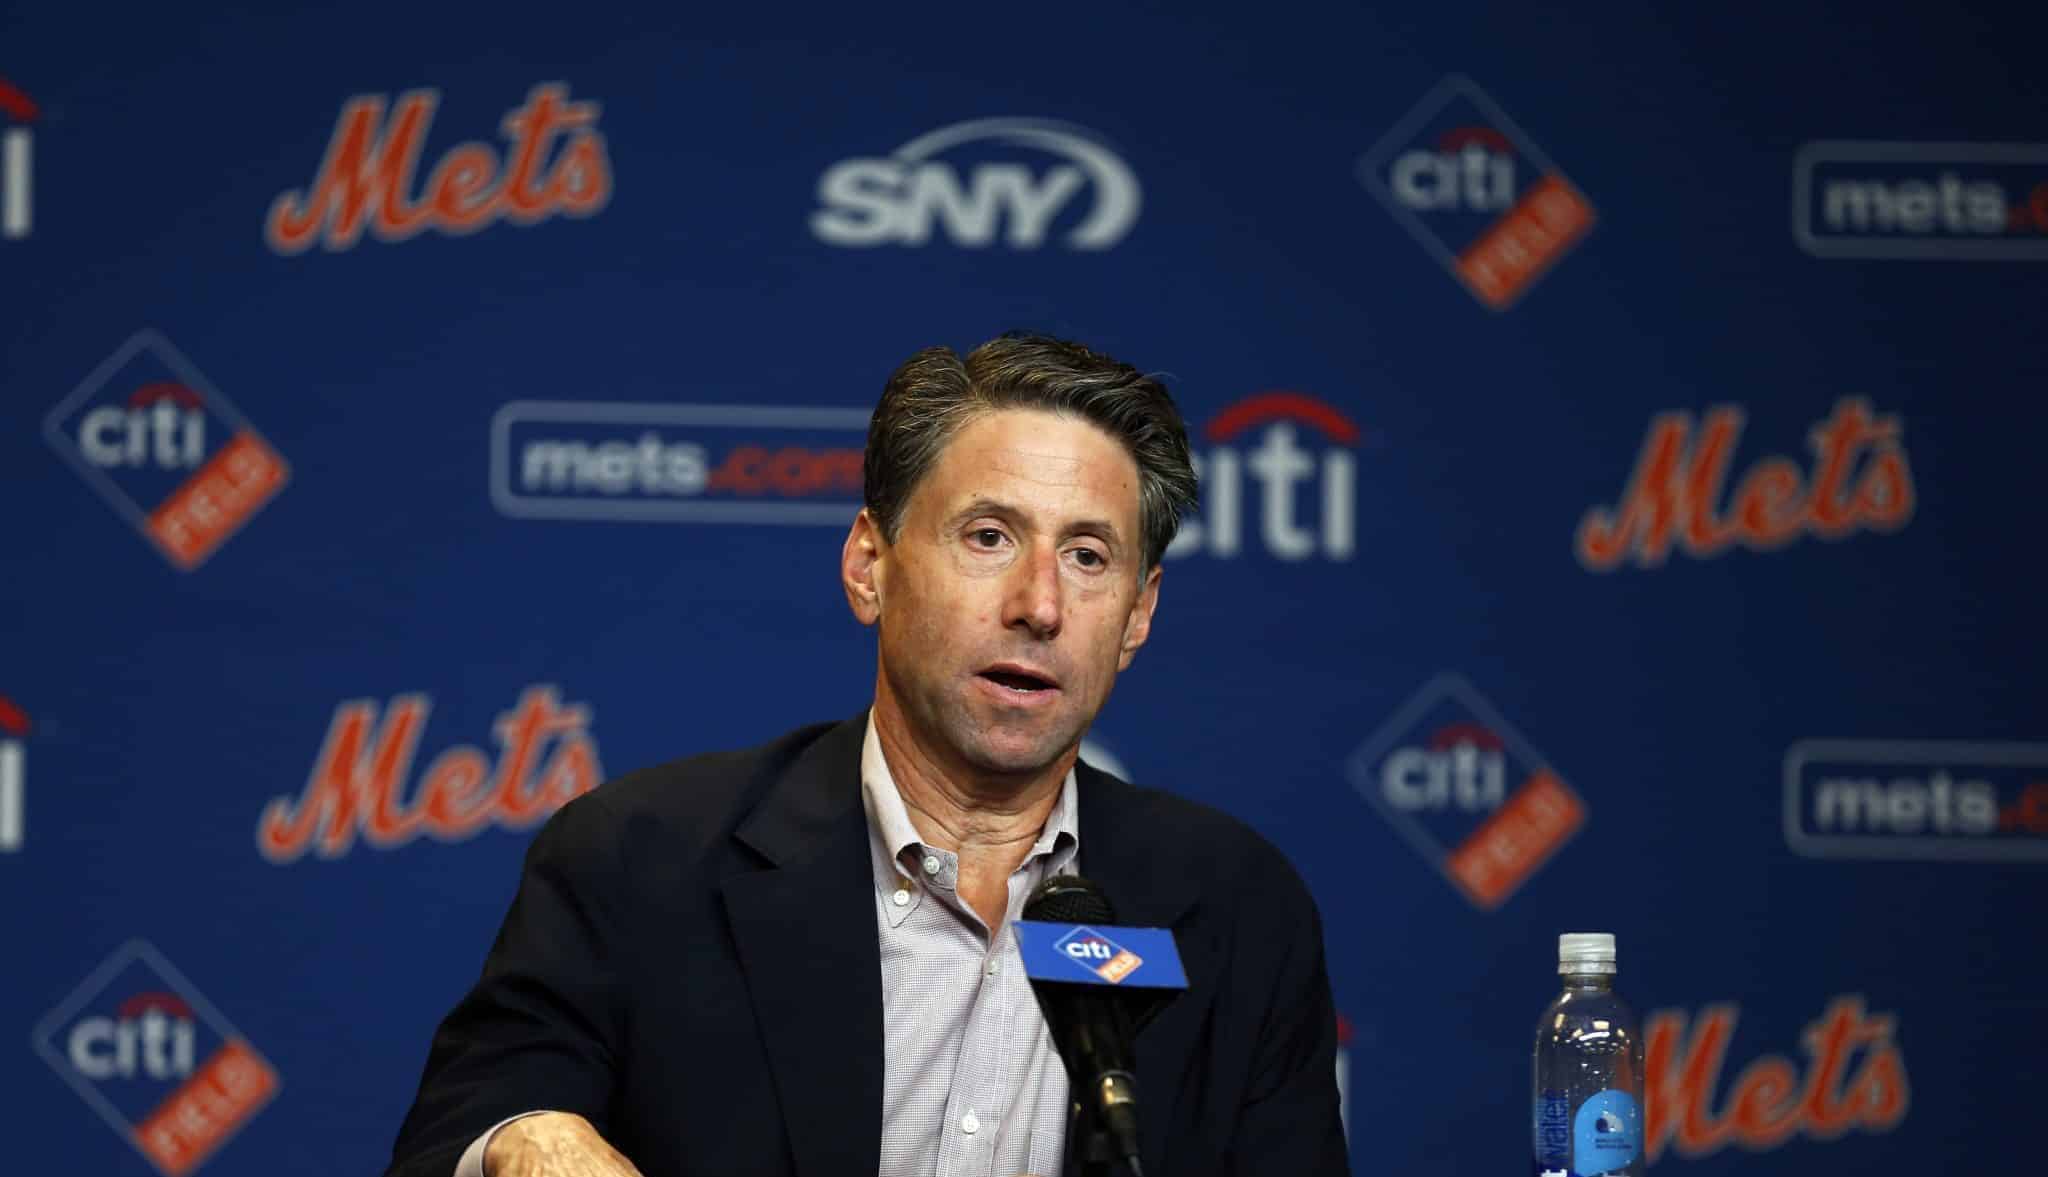 NEW YORK, NY - SEPTEMBER 30: New York Mets COO Jeff Wilpon speaks to the media prior to a game against the Miami Marlins at Citi Field on September 30, 2018 in the Flushing neighborhood of the Queens borough of New York City.